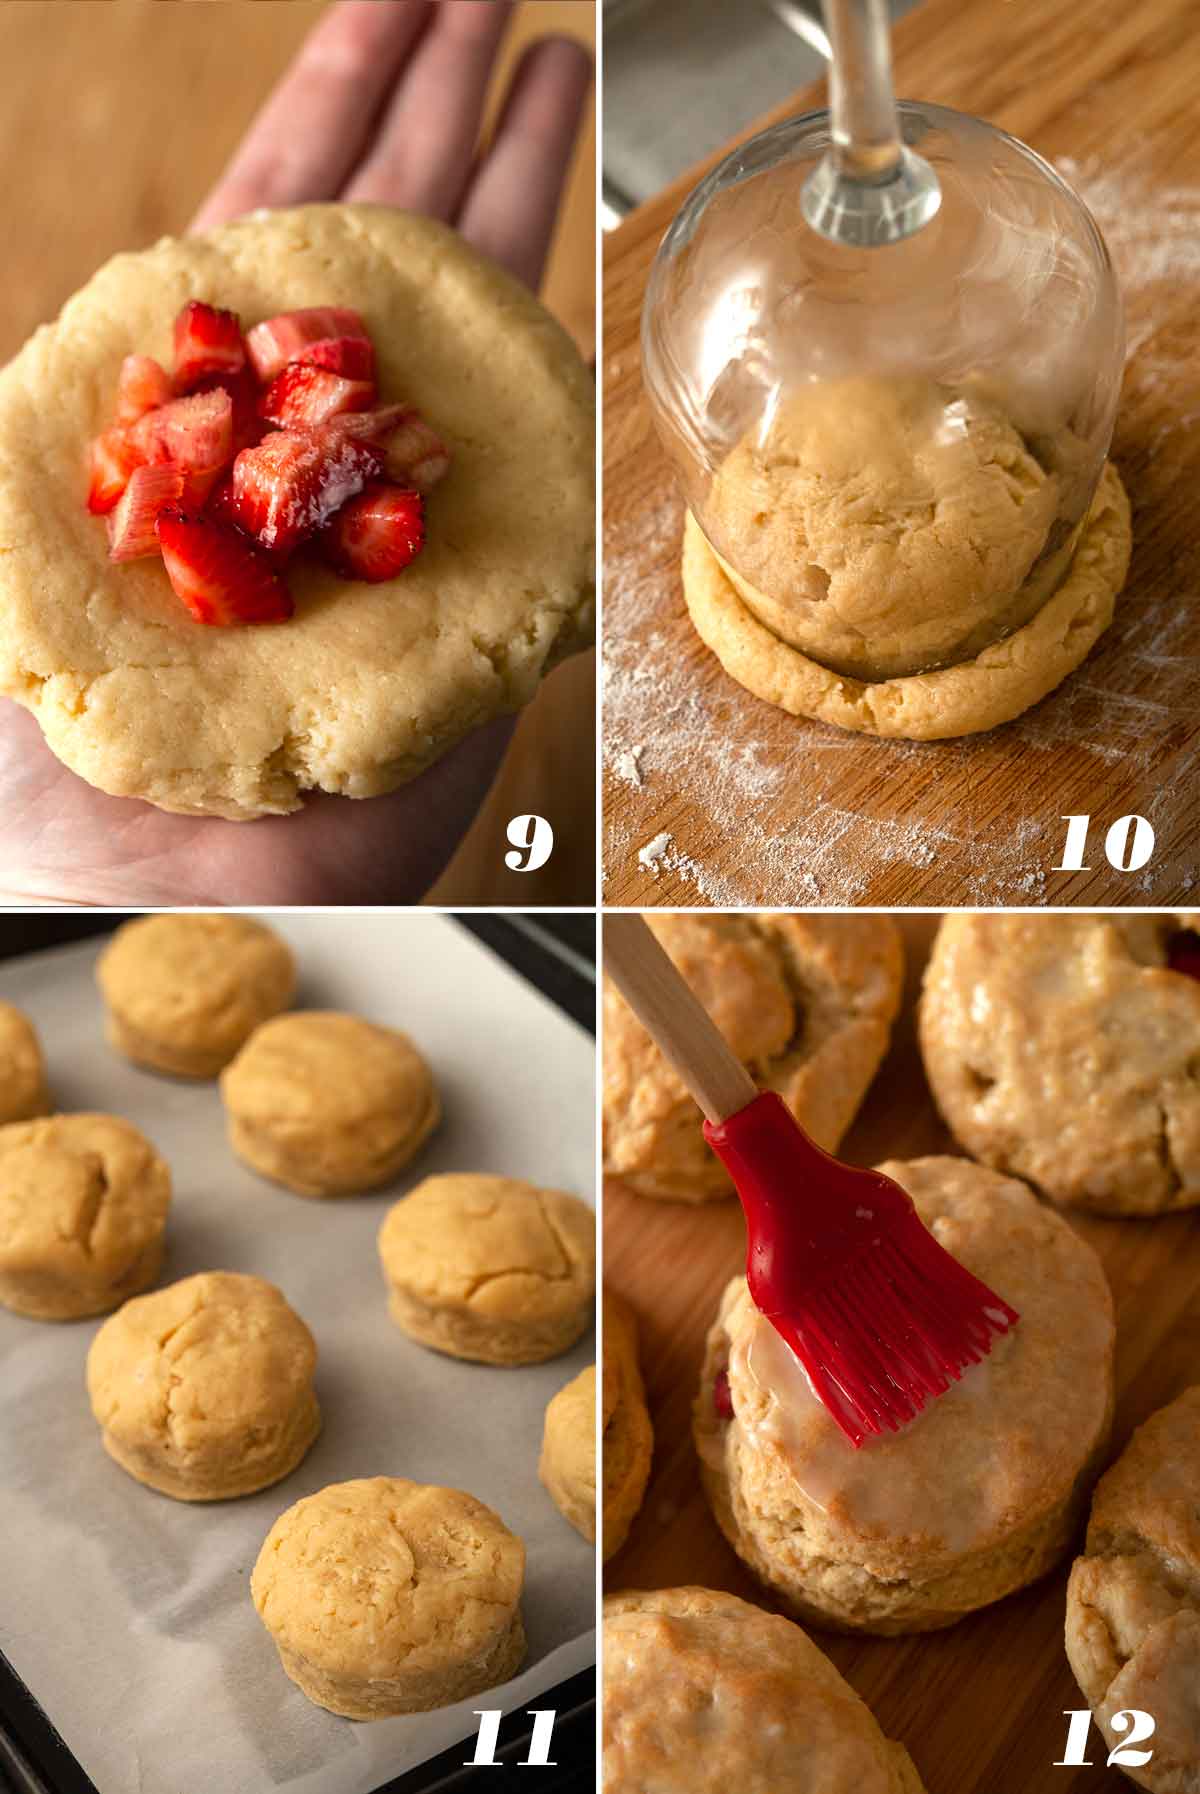 A collage of 4 images showing how to stuff and glaze scones.